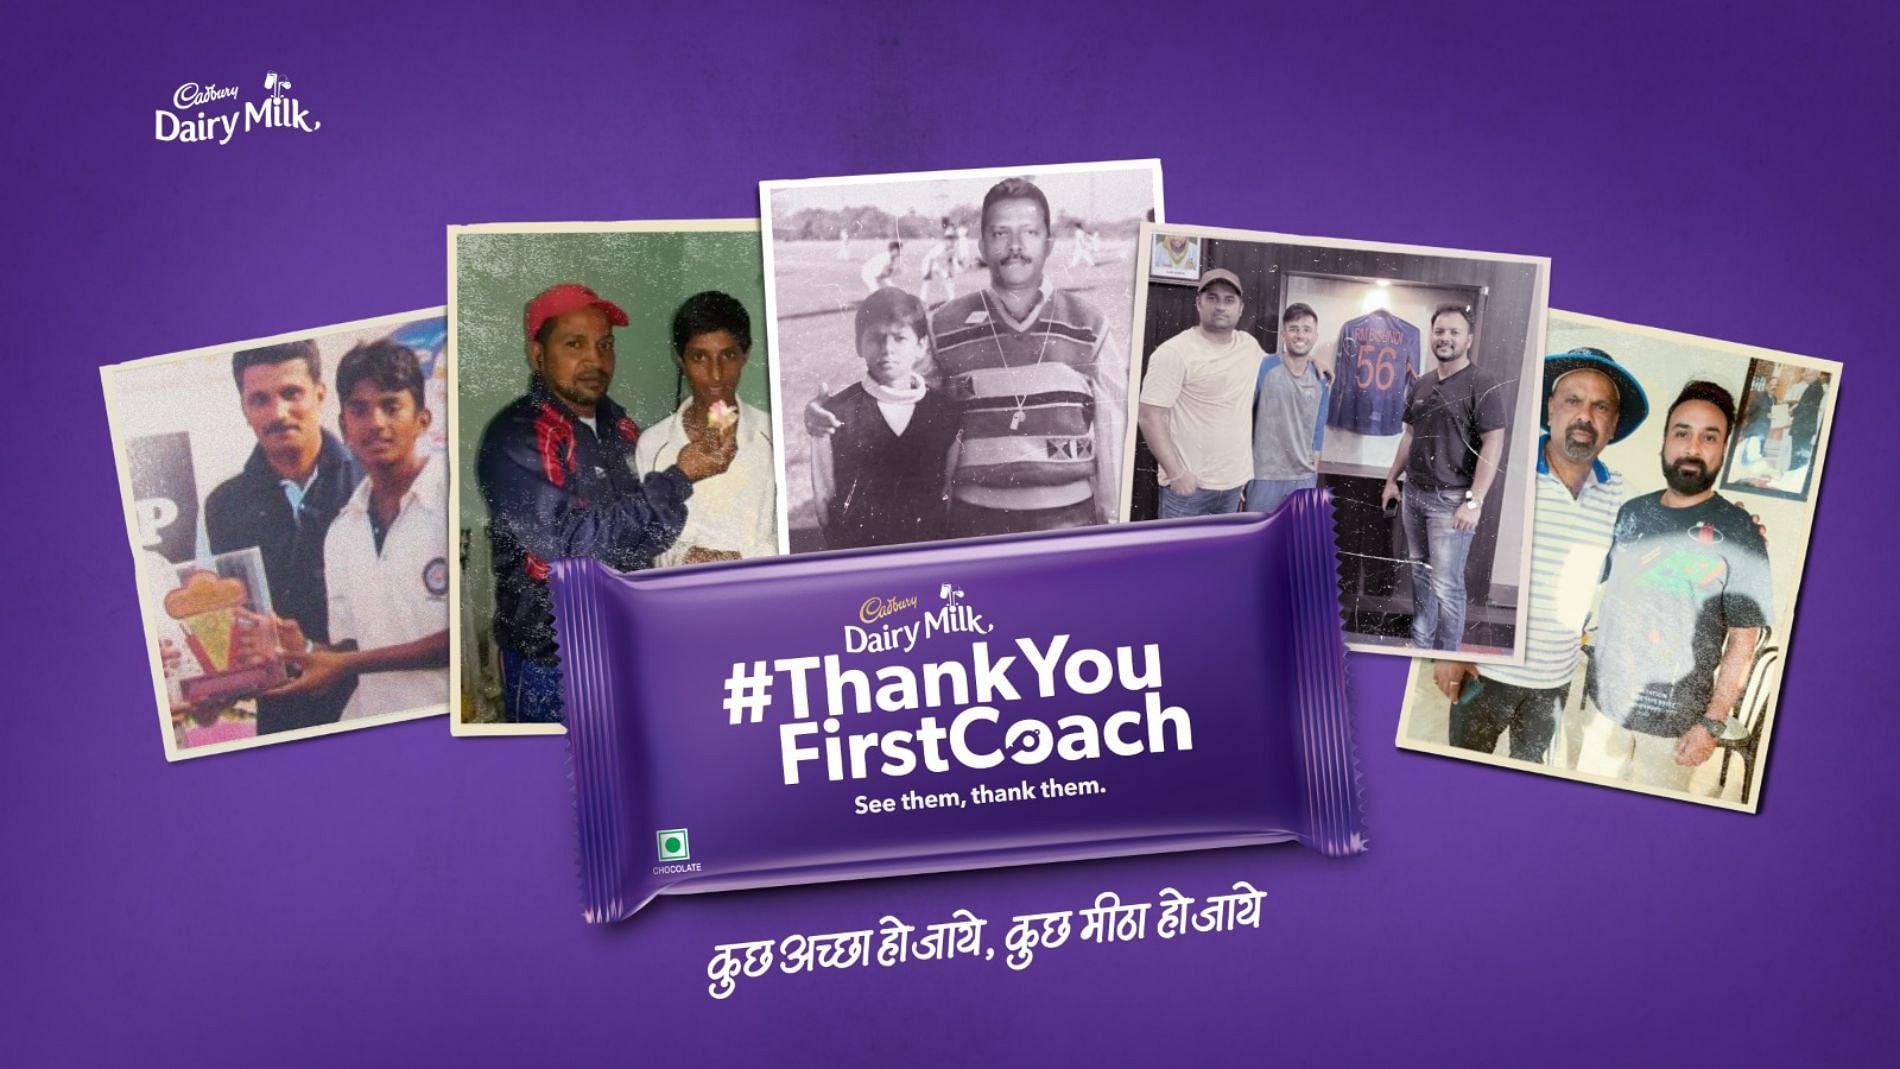 Cadbury Dairy Milk&rsquo;s #ThankYouFirstCoach campaign pays tribute to some of the unsung mentors of renowned Indian cricketers.